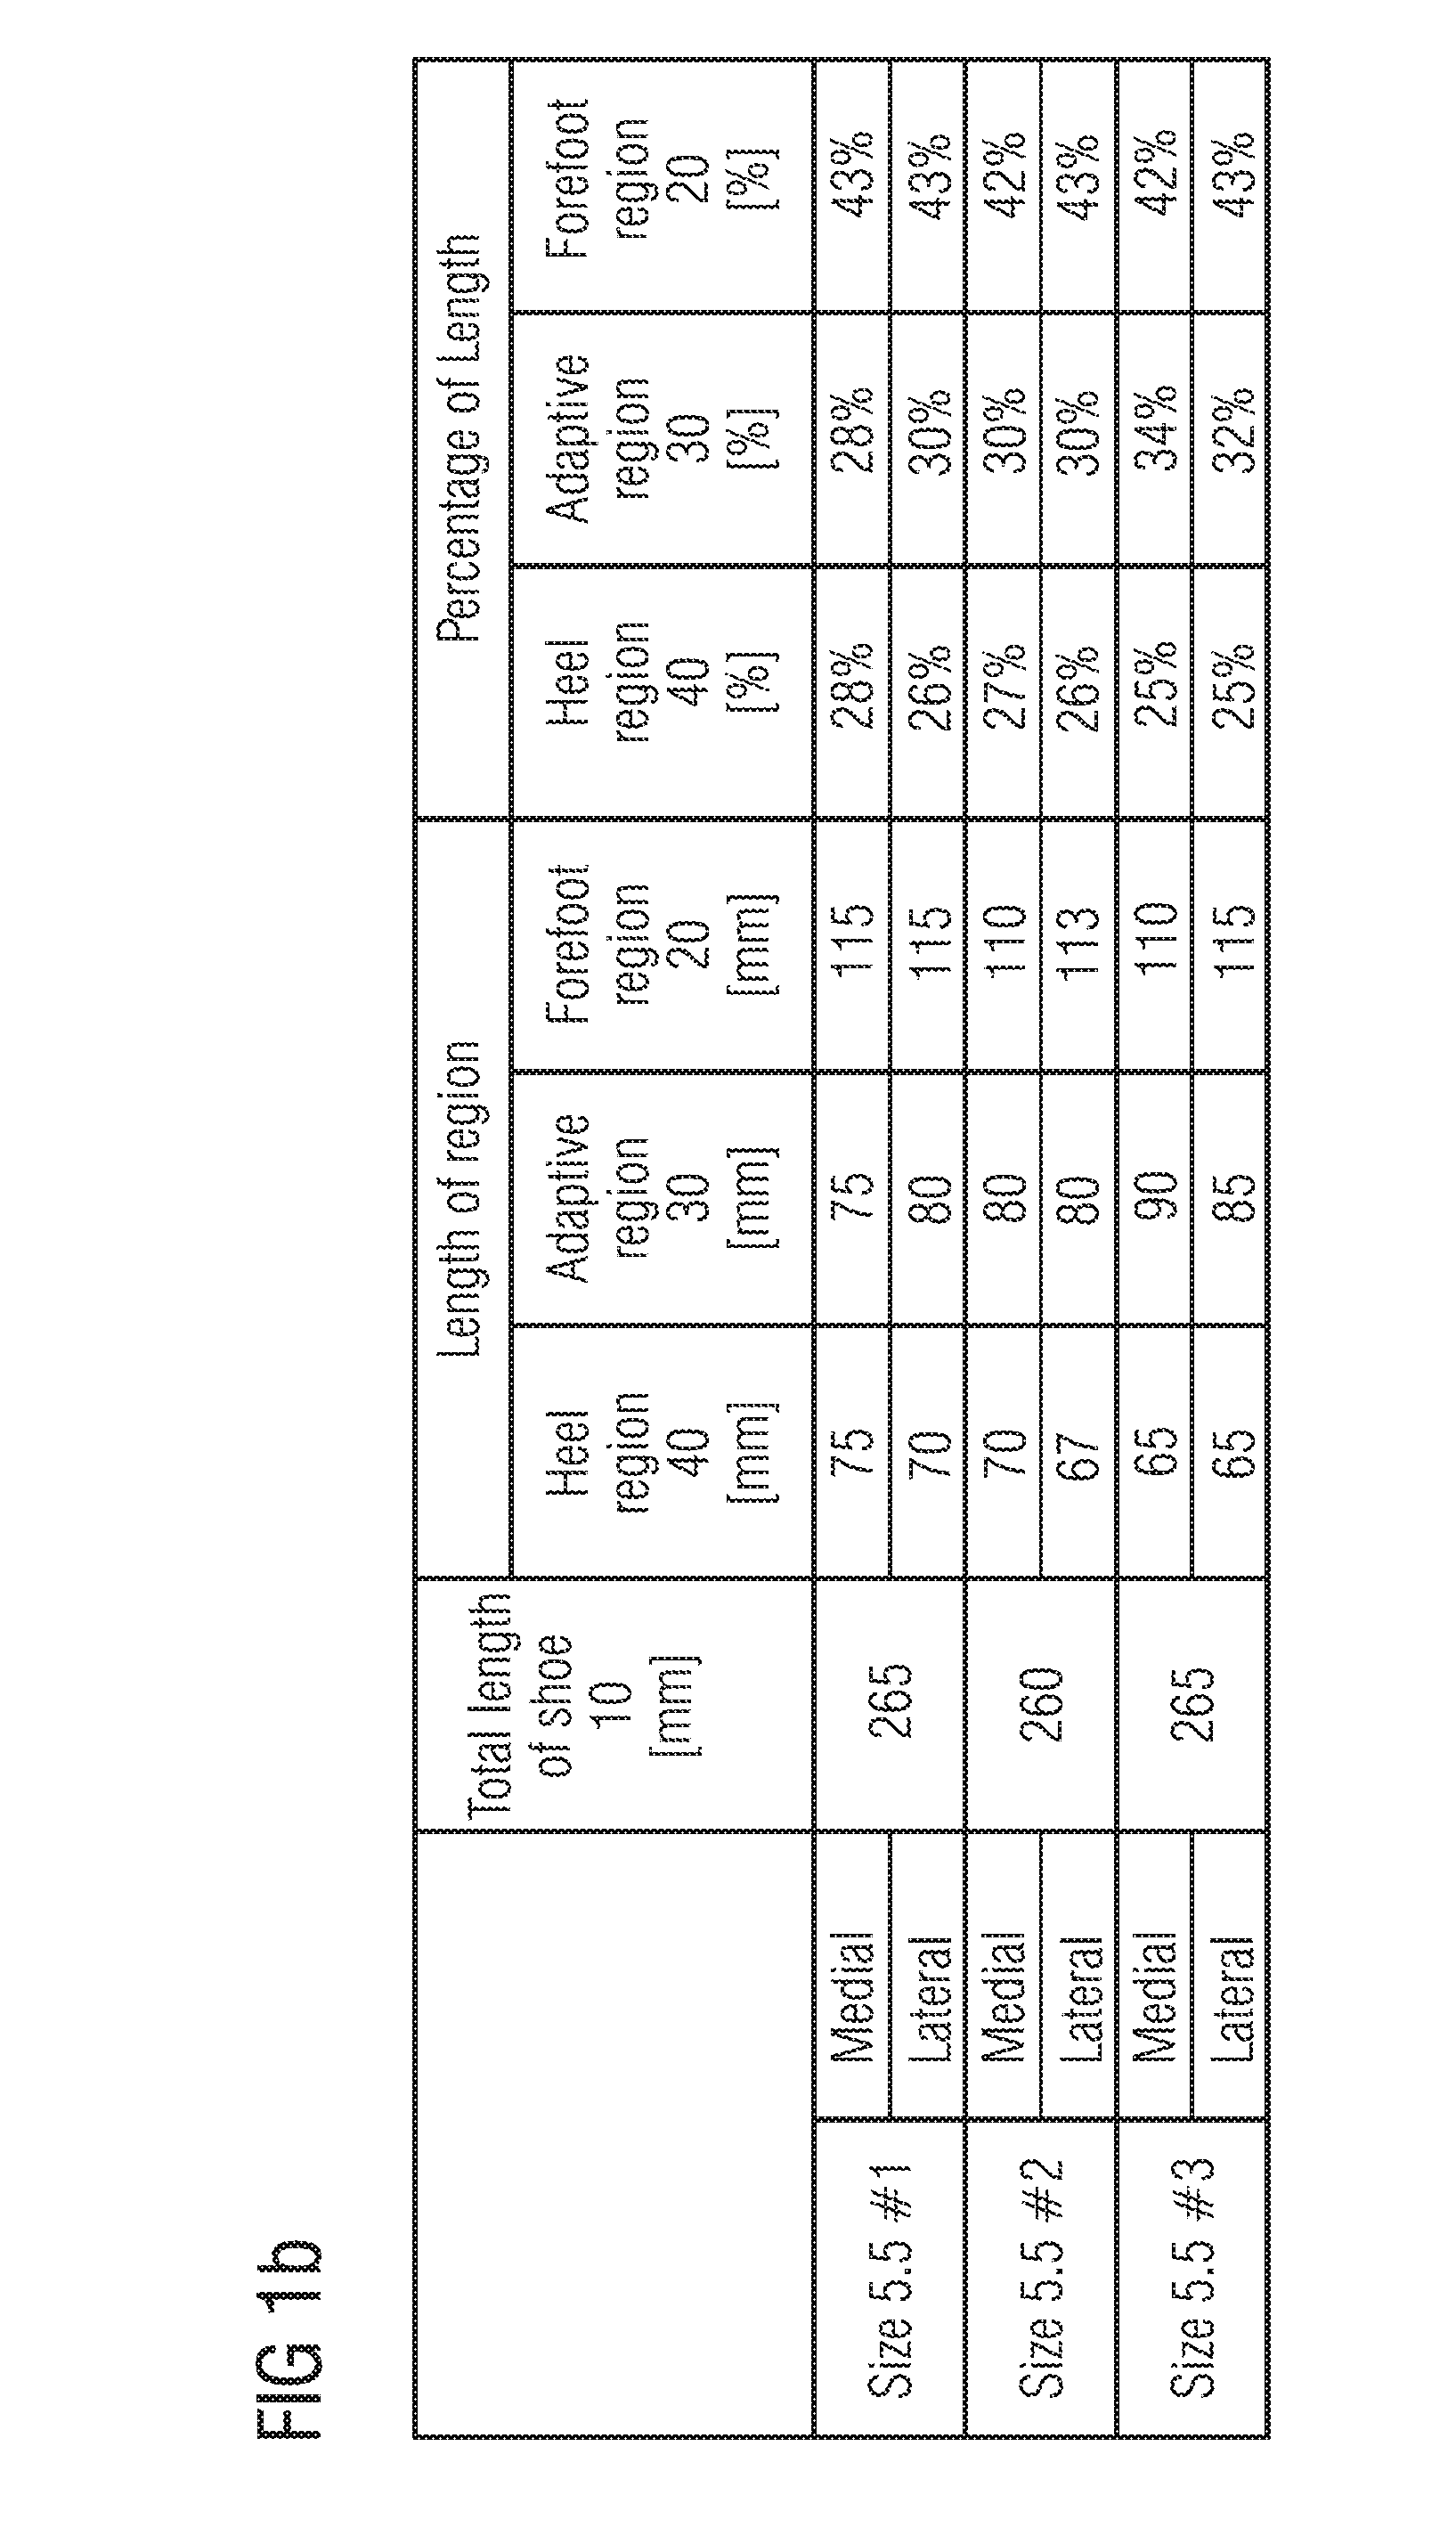 Sports Shoe and Method for the Manufacture Thereof